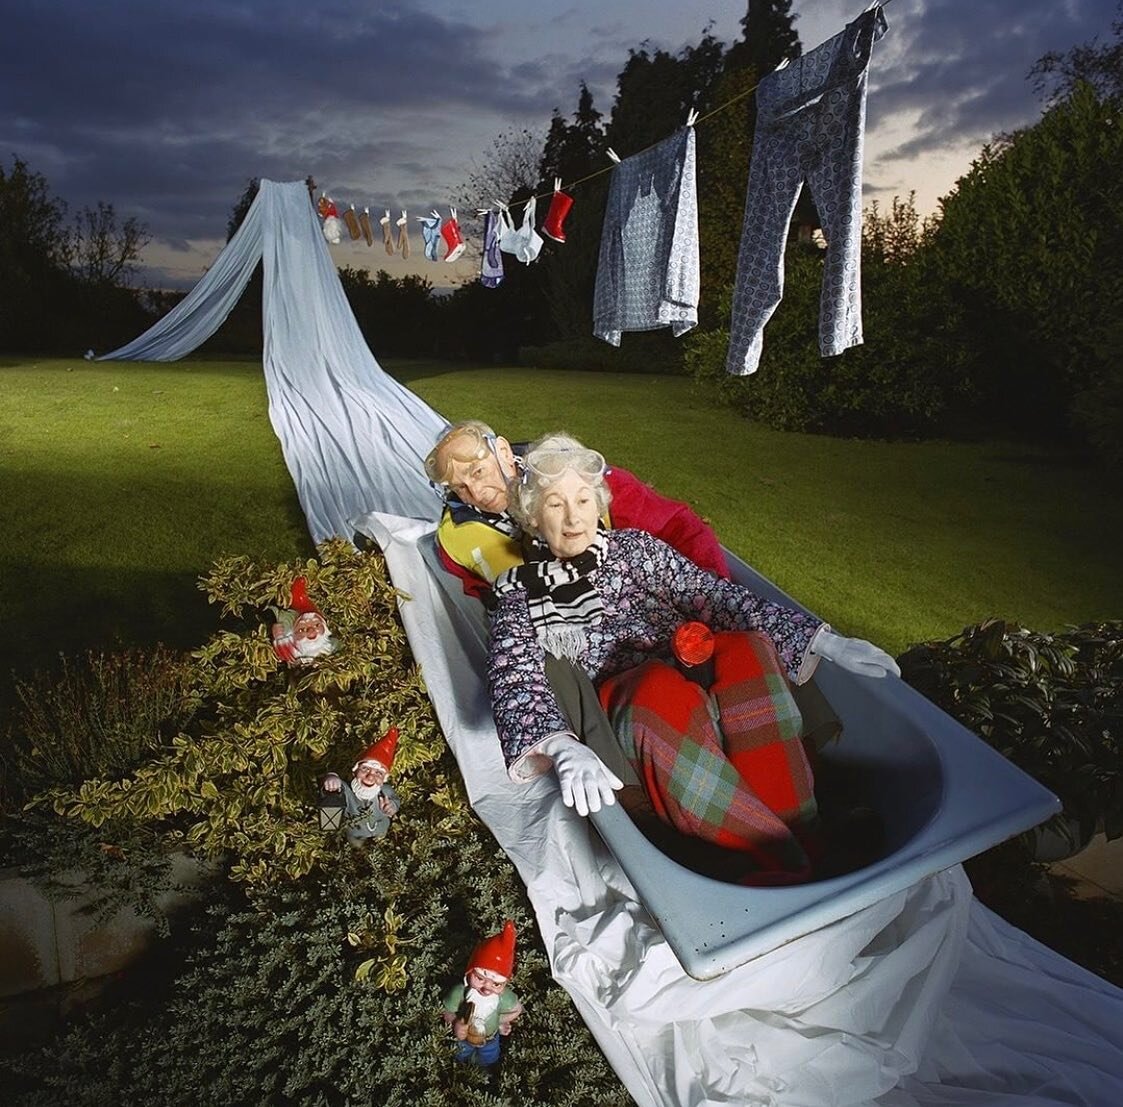 Image &lsquo;Over the Hill and Far Away&rsquo; by @colingray3970 from the series &lsquo;The Parents&rsquo;

#theoutsideinproject1